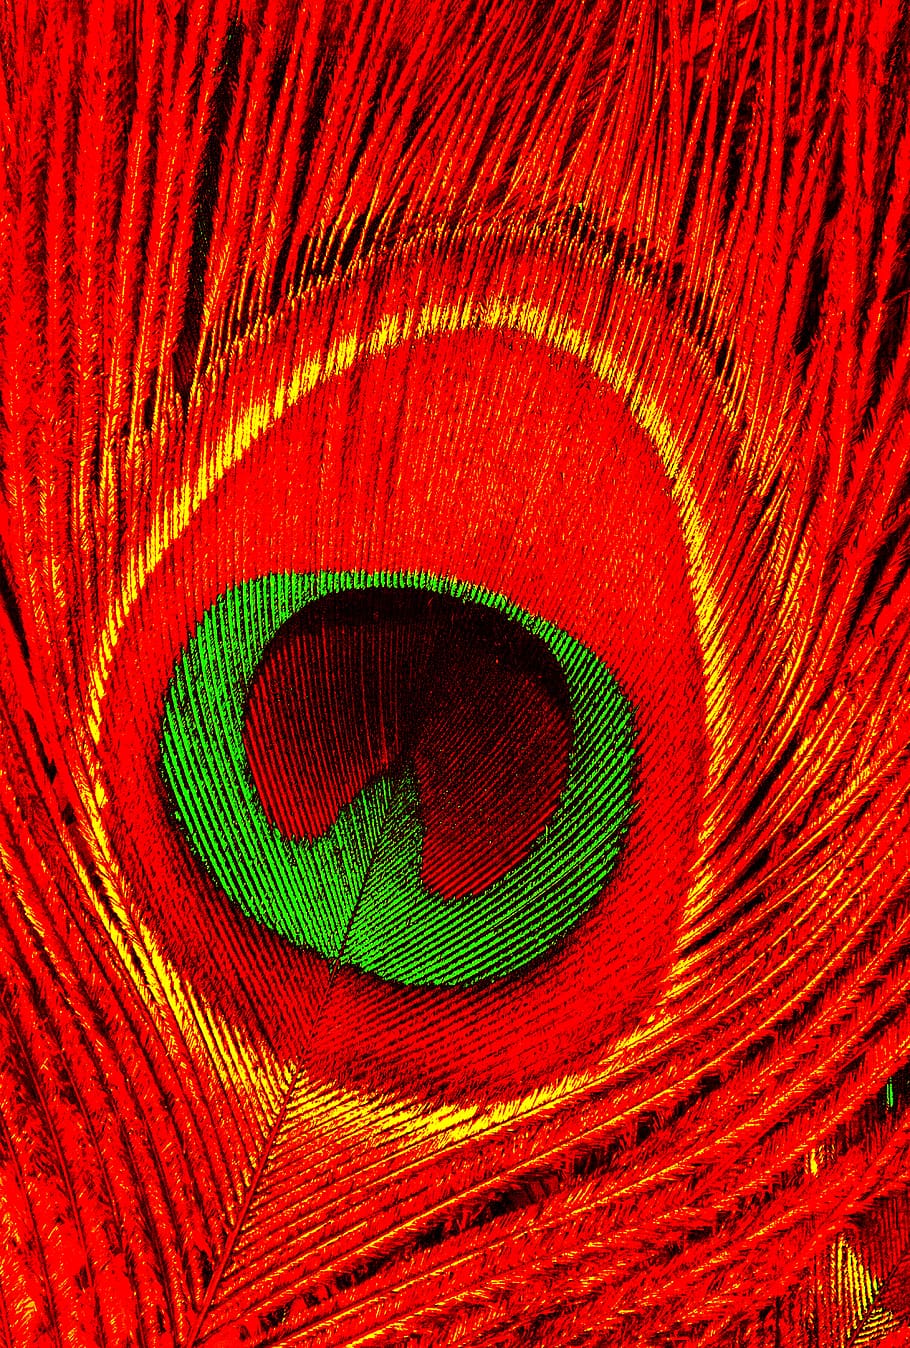 fur, bird, animal, colorful, peacock, red, close-up, full frame, backgrounds, pattern